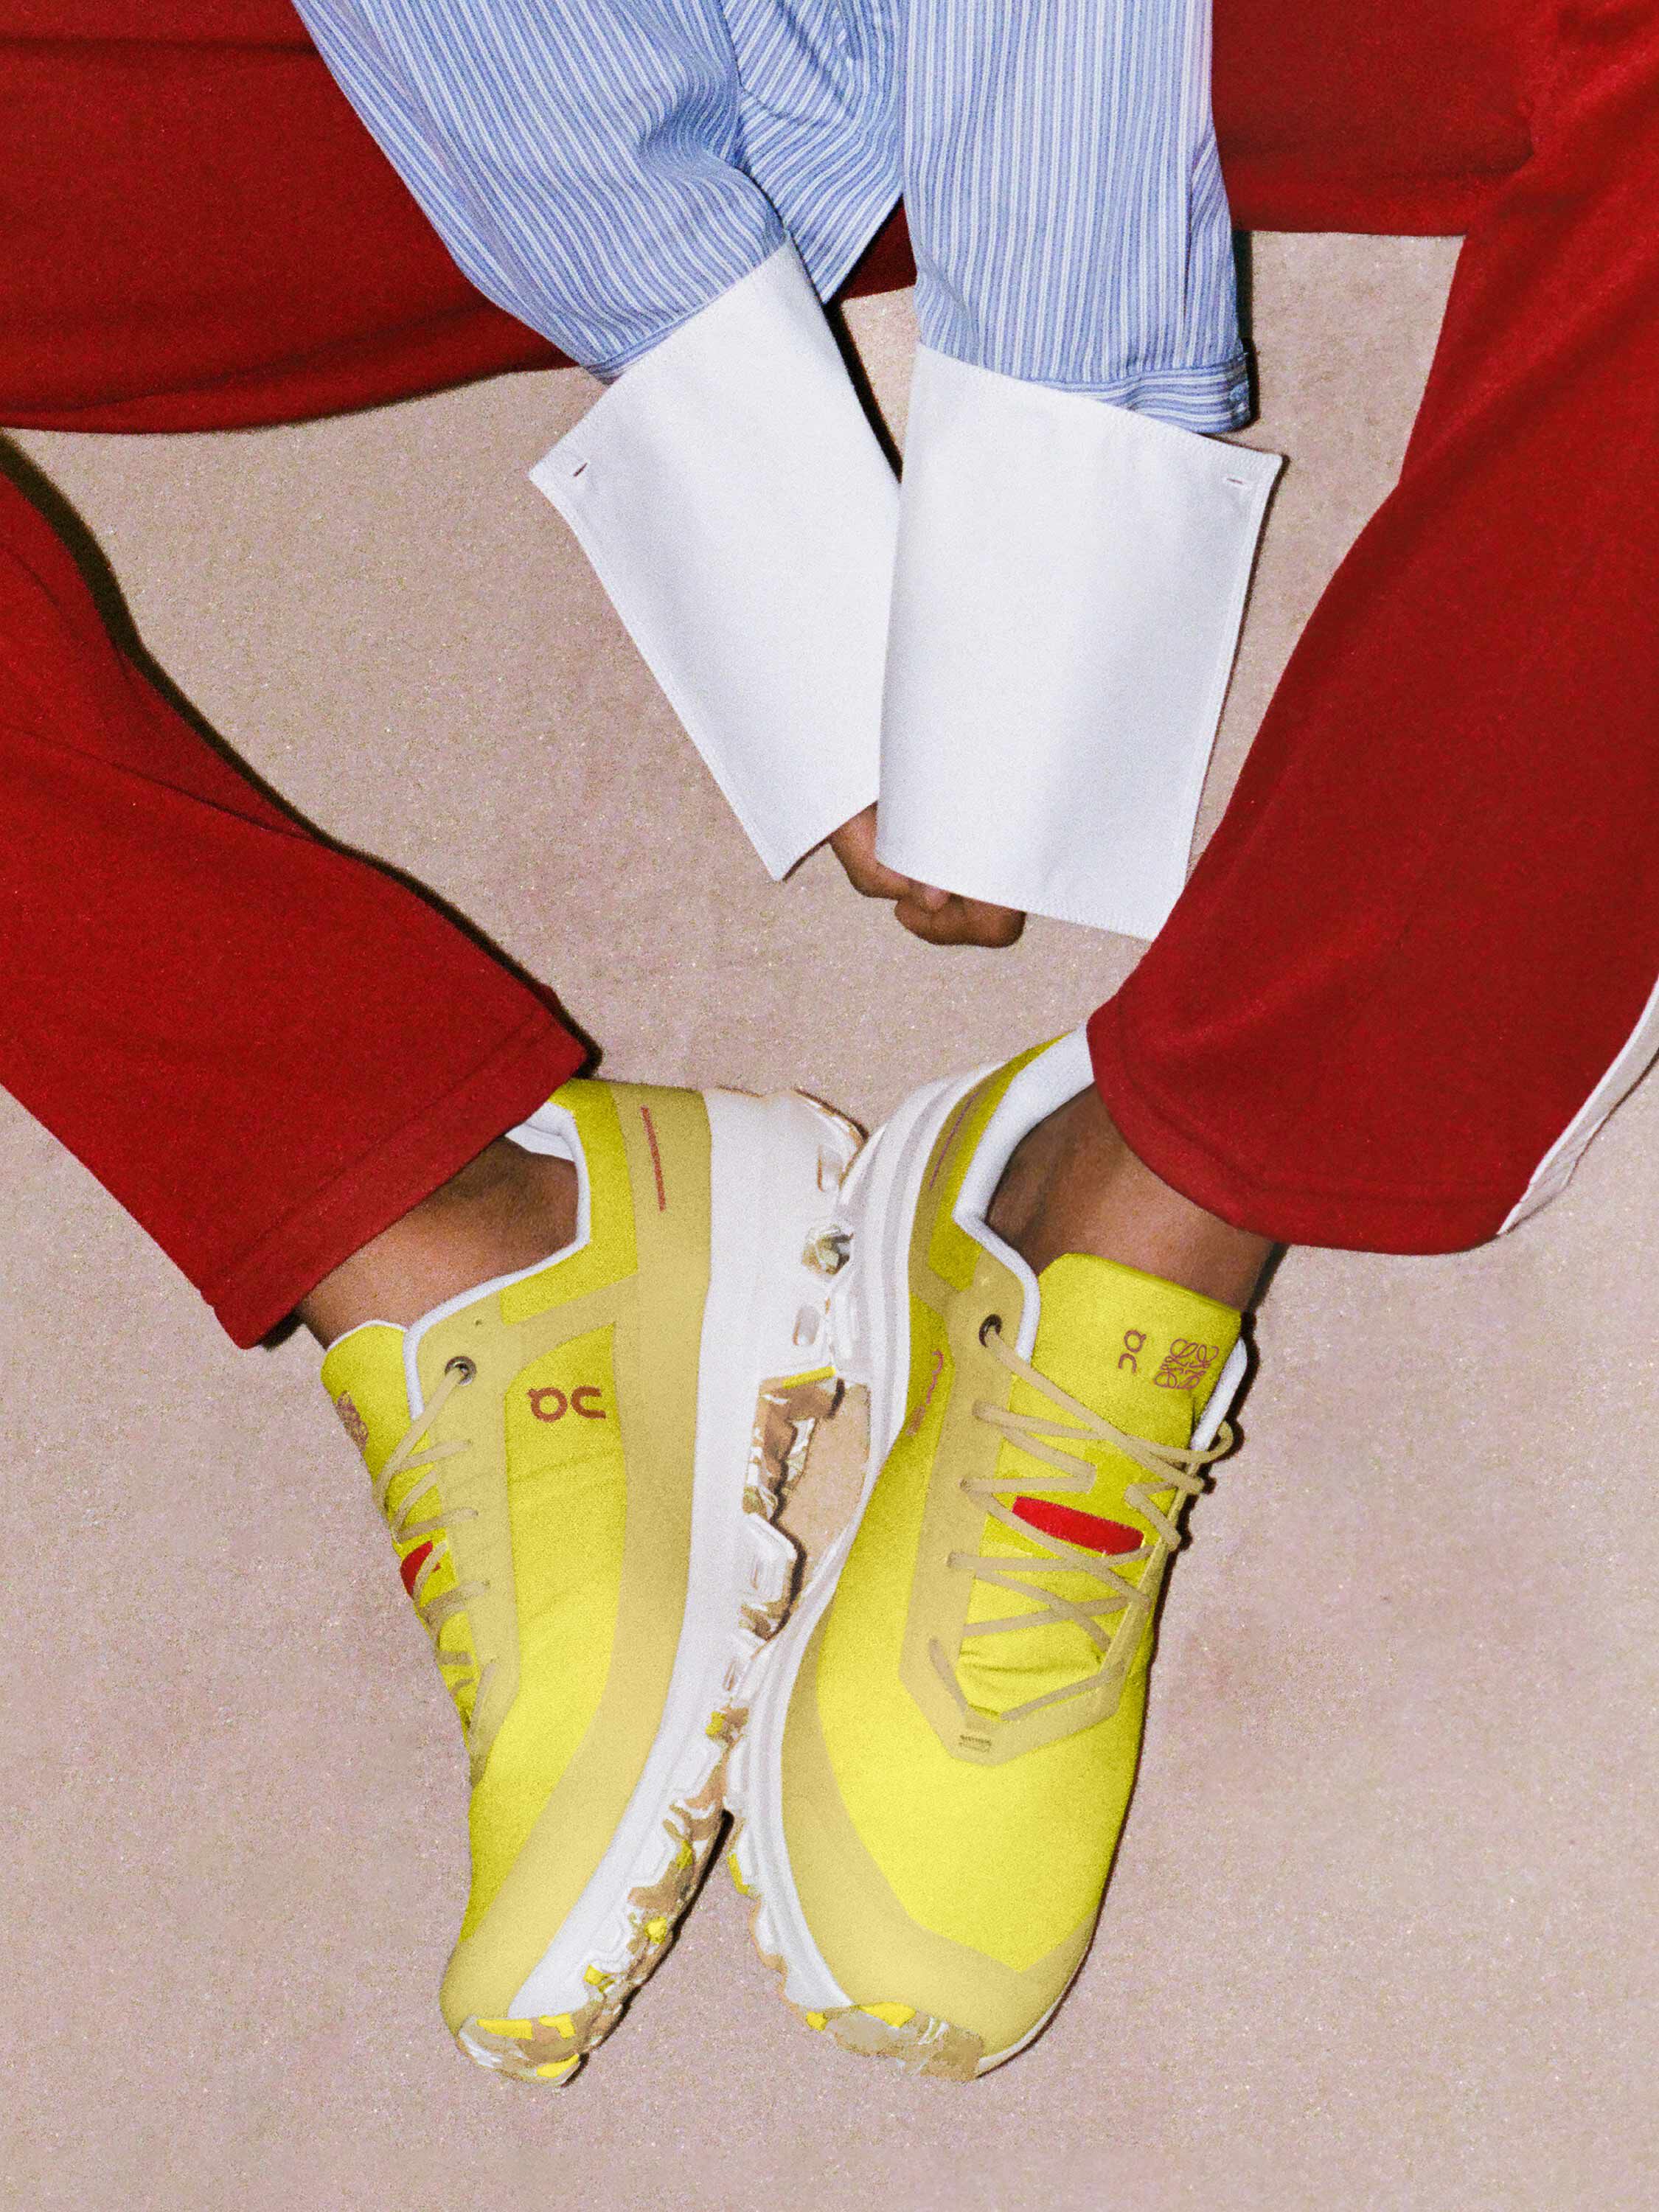 LOEWE x On running shoes collection